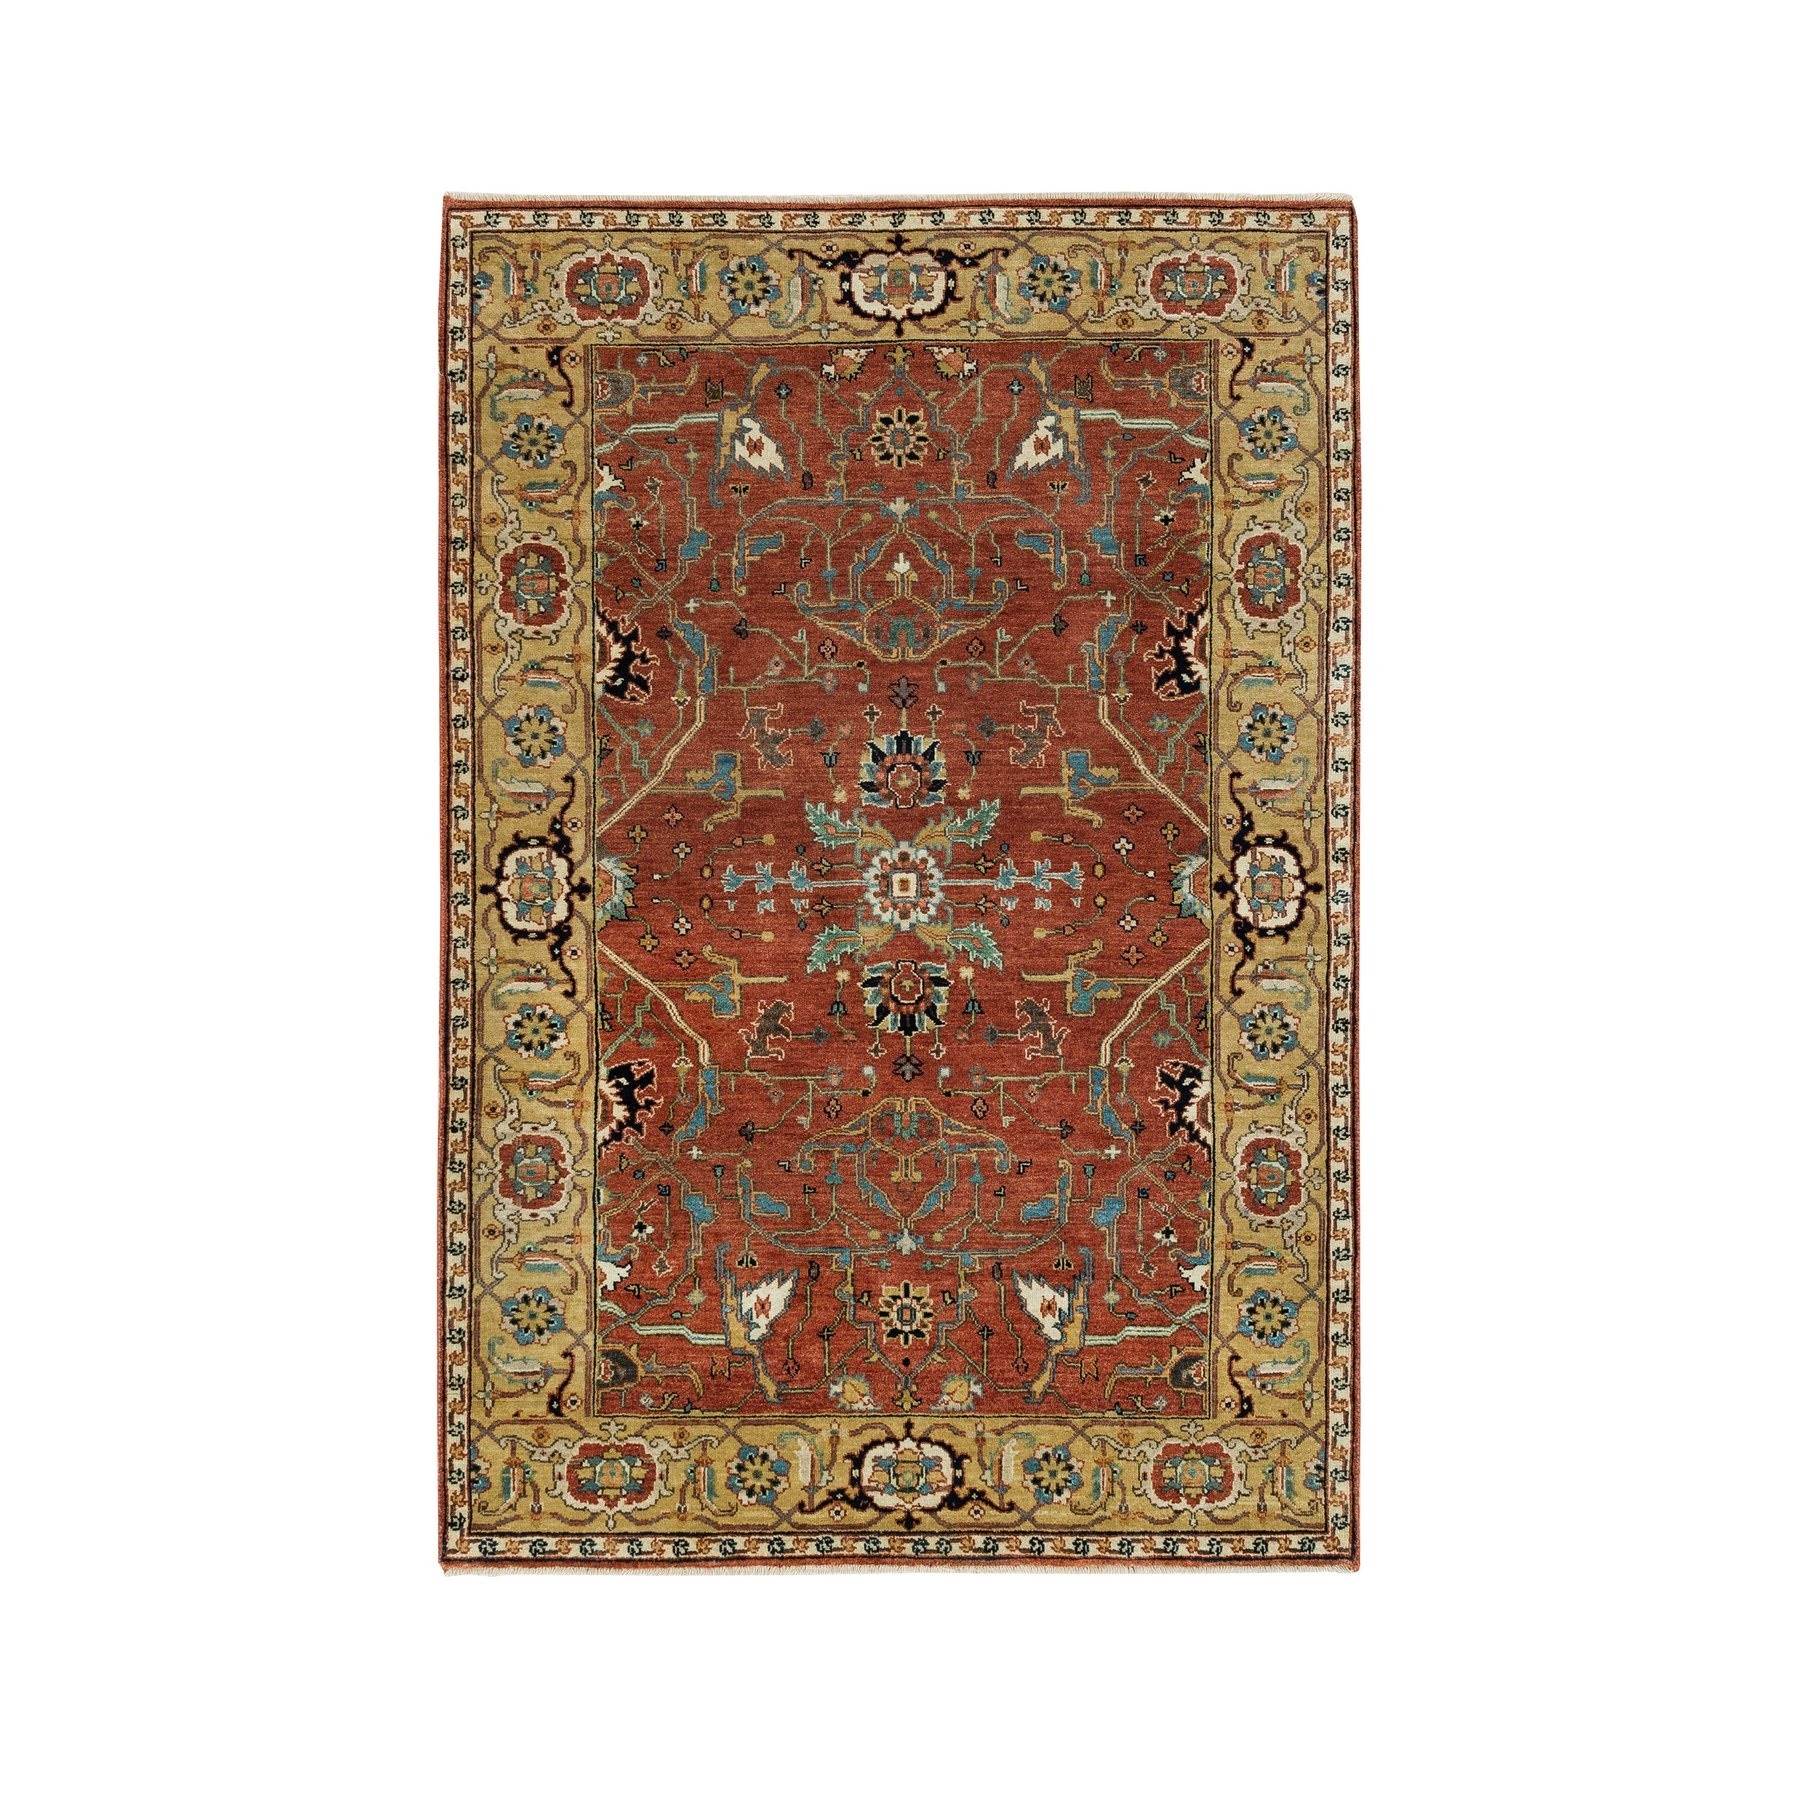 4'x6'1" Rufous Red, Antiqued Fine Heriz Re-Creation, Dense Weave, Soft and Lush, Natural Dyes, Soft Wool, Hand Woven, Oriental Rug 